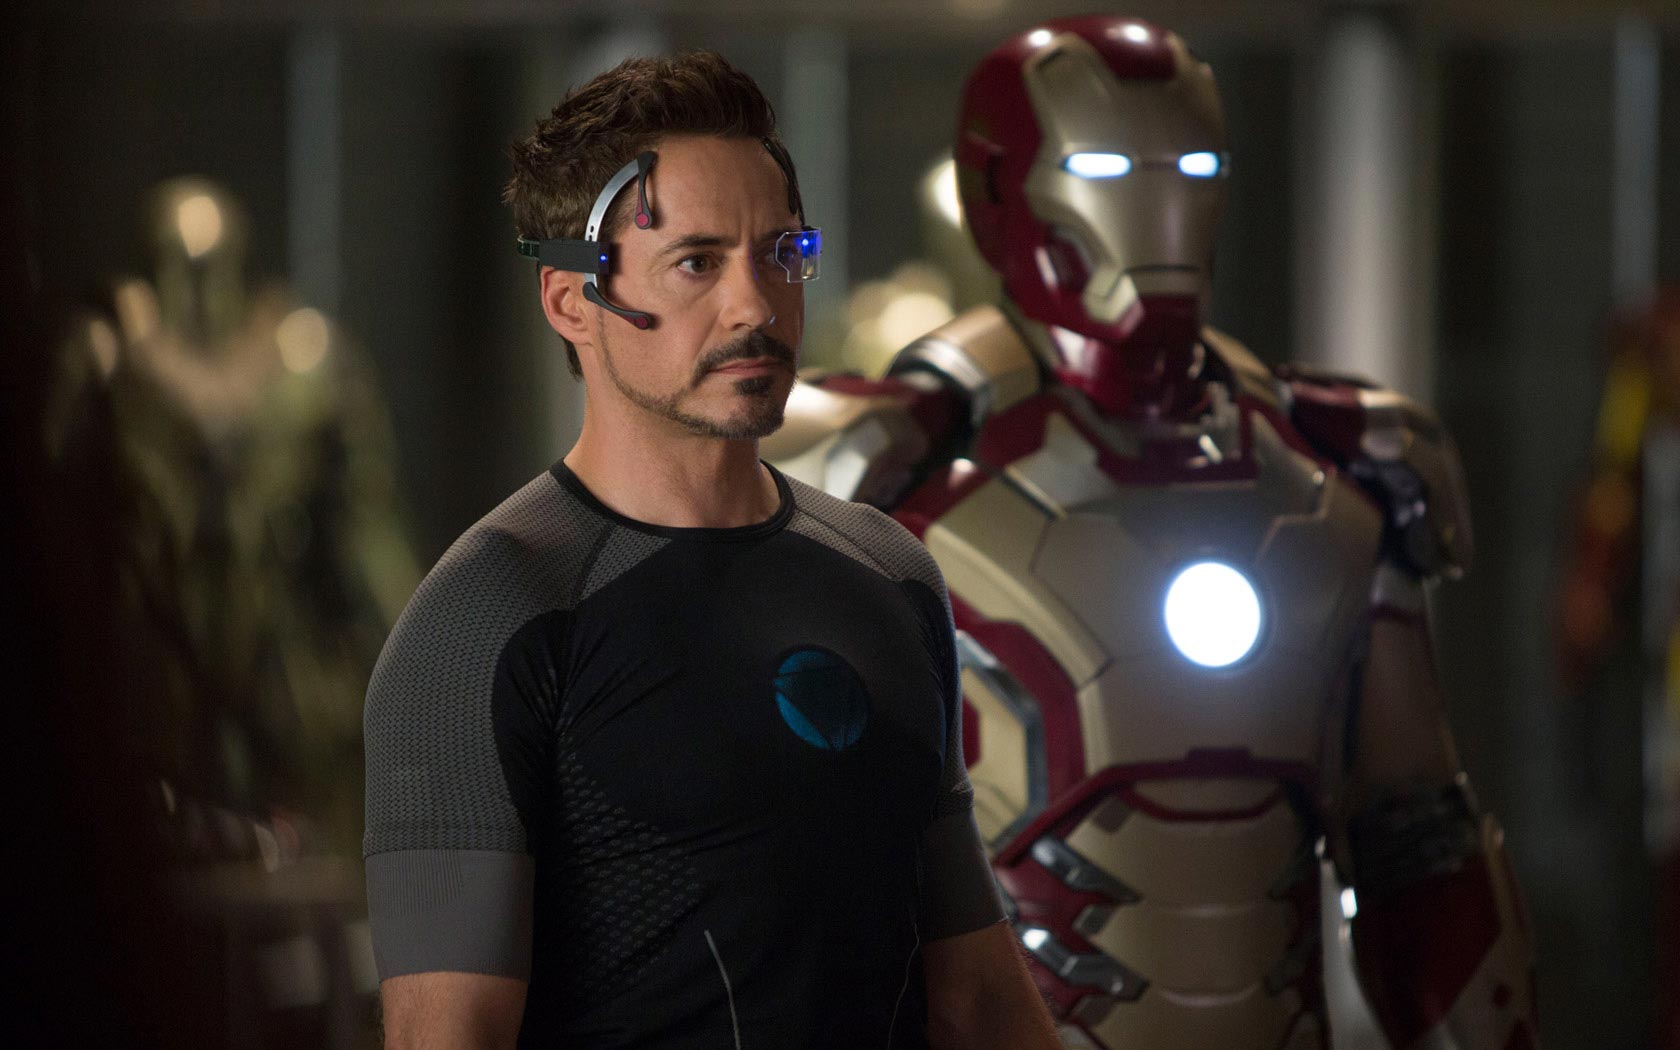 Most Awaited Movie Of 2013 | Marvel Iron Man 3 HD Wallpapers, Movie